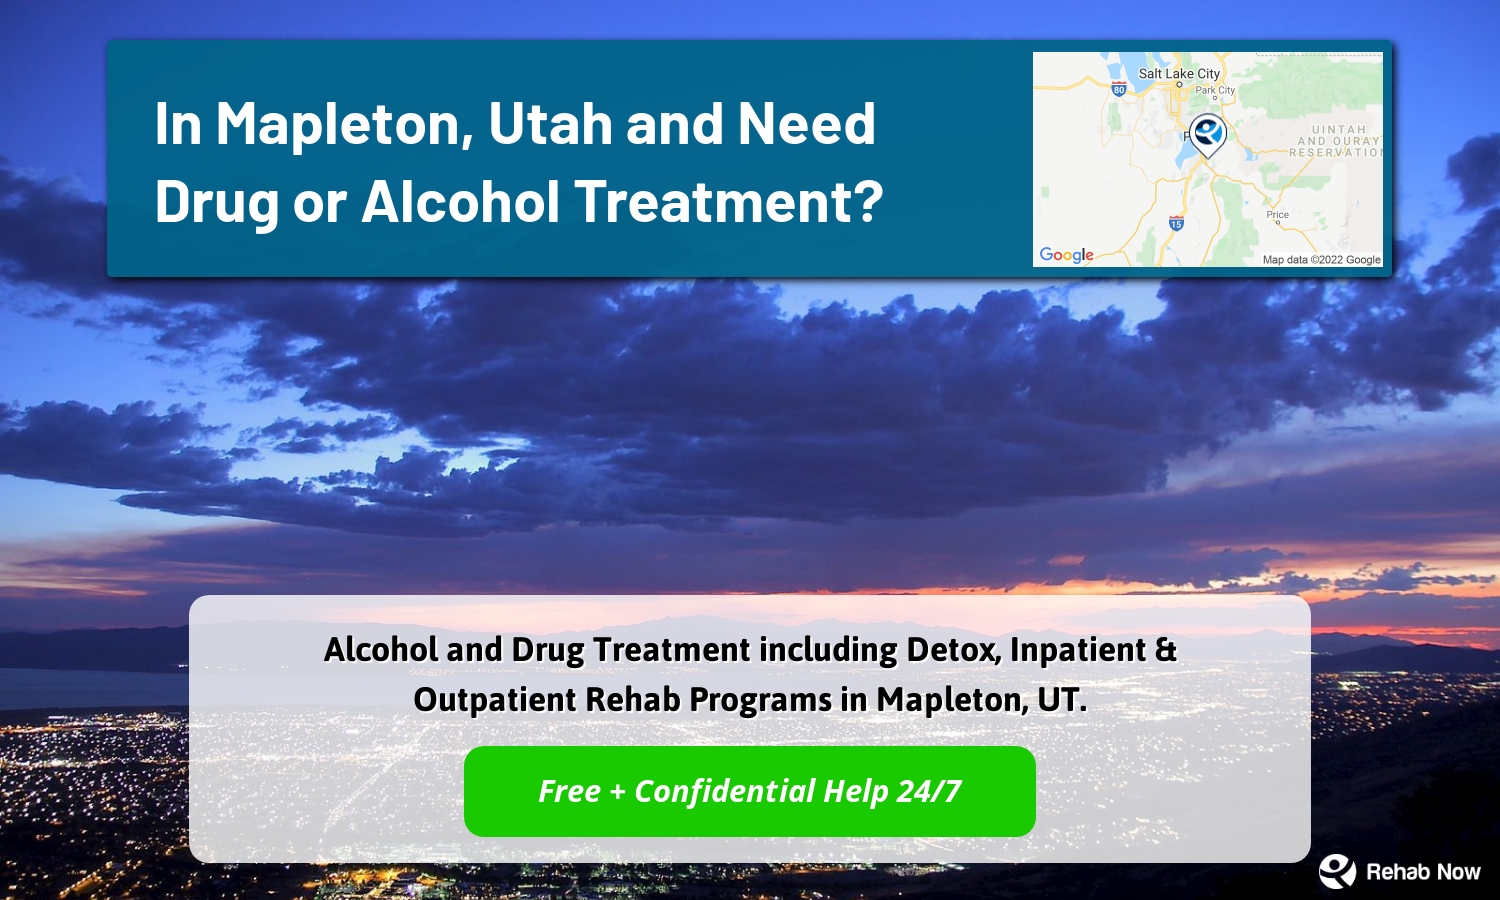 Alcohol and Drug Treatment including Detox, Inpatient & Outpatient Rehab Programs in Mapleton, UT.